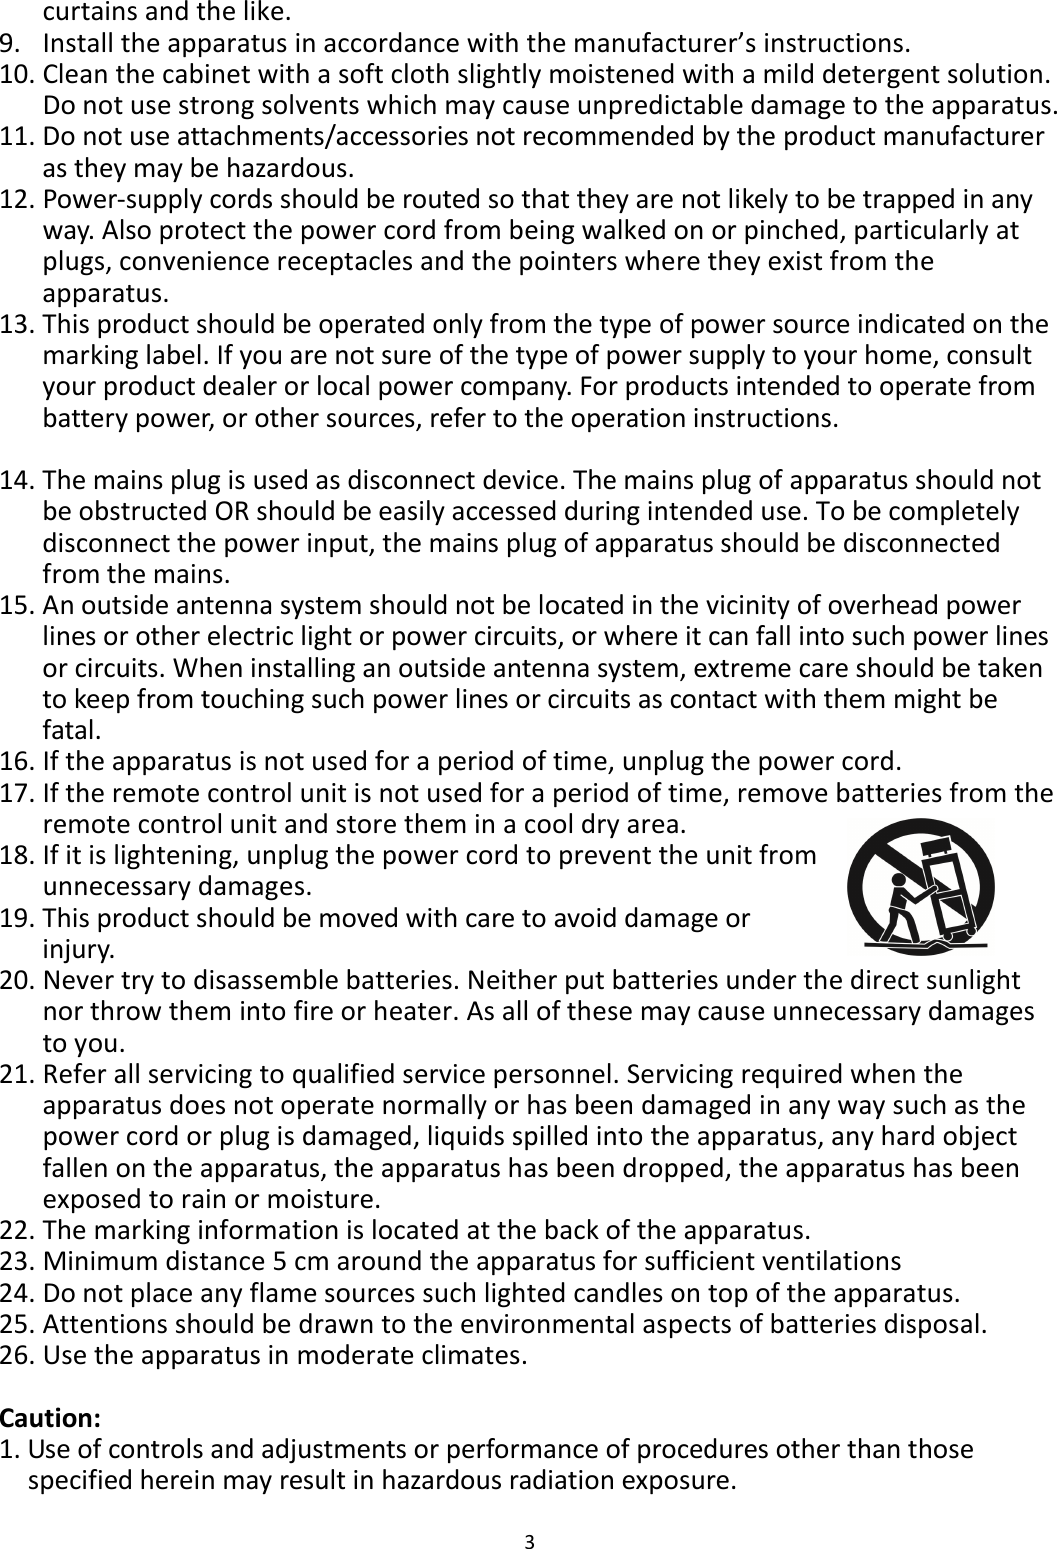 3  curtains and the like. 9. Install the apparatus in accordance with the manufacturer’s instructions. 10. Clean the cabinet with a soft cloth slightly moistened with a mild detergent solution. Do not use strong solvents which may cause unpredictable damage to the apparatus. 11. Do not use attachments/accessories not recommended by the product manufacturer as they may be hazardous. 12. Power-supply cords should be routed so that they are not likely to be trapped in any way. Also protect the power cord from being walked on or pinched, particularly at plugs, convenience receptacles and the pointers where they exist from the apparatus. 13. This product should be operated only from the type of power source indicated on the marking label. If you are not sure of the type of power supply to your home, consult your product dealer or local power company. For products intended to operate from battery power, or other sources, refer to the operation instructions.  14. The mains plug is used as disconnect device. The mains plug of apparatus should not be obstructed OR should be easily accessed during intended use. To be completely disconnect the power input, the mains plug of apparatus should be disconnected from the mains. 15. An outside antenna system should not be located in the vicinity of overhead power lines or other electric light or power circuits, or where it can fall into such power lines or circuits. When installing an outside antenna system, extreme care should be taken to keep from touching such power lines or circuits as contact with them might be fatal. 16. If the apparatus is not used for a period of time, unplug the power cord.   17. If the remote control unit is not used for a period of time, remove batteries from the remote control unit and store them in a cool dry area. 18. If it is lightening, unplug the power cord to prevent the unit from unnecessary damages. 19. This product should be moved with care to avoid damage or injury.   20. Never try to disassemble batteries. Neither put batteries under the direct sunlight nor throw them into fire or heater. As all of these may cause unnecessary damages to you. 21. Refer all servicing to qualified service personnel. Servicing required when the apparatus does not operate normally or has been damaged in any way such as the power cord or plug is damaged, liquids spilled into the apparatus, any hard object fallen on the apparatus, the apparatus has been dropped, the apparatus has been exposed to rain or moisture. 22. The marking information is located at the back of the apparatus. 23. Minimum distance 5 cm around the apparatus for sufficient ventilations   24. Do not place any flame sources such lighted candles on top of the apparatus. 25. Attentions should be drawn to the environmental aspects of batteries disposal. 26. Use the apparatus in moderate climates.  Caution: 1. Use of controls and adjustments or performance of procedures other than those specified herein may result in hazardous radiation exposure. 